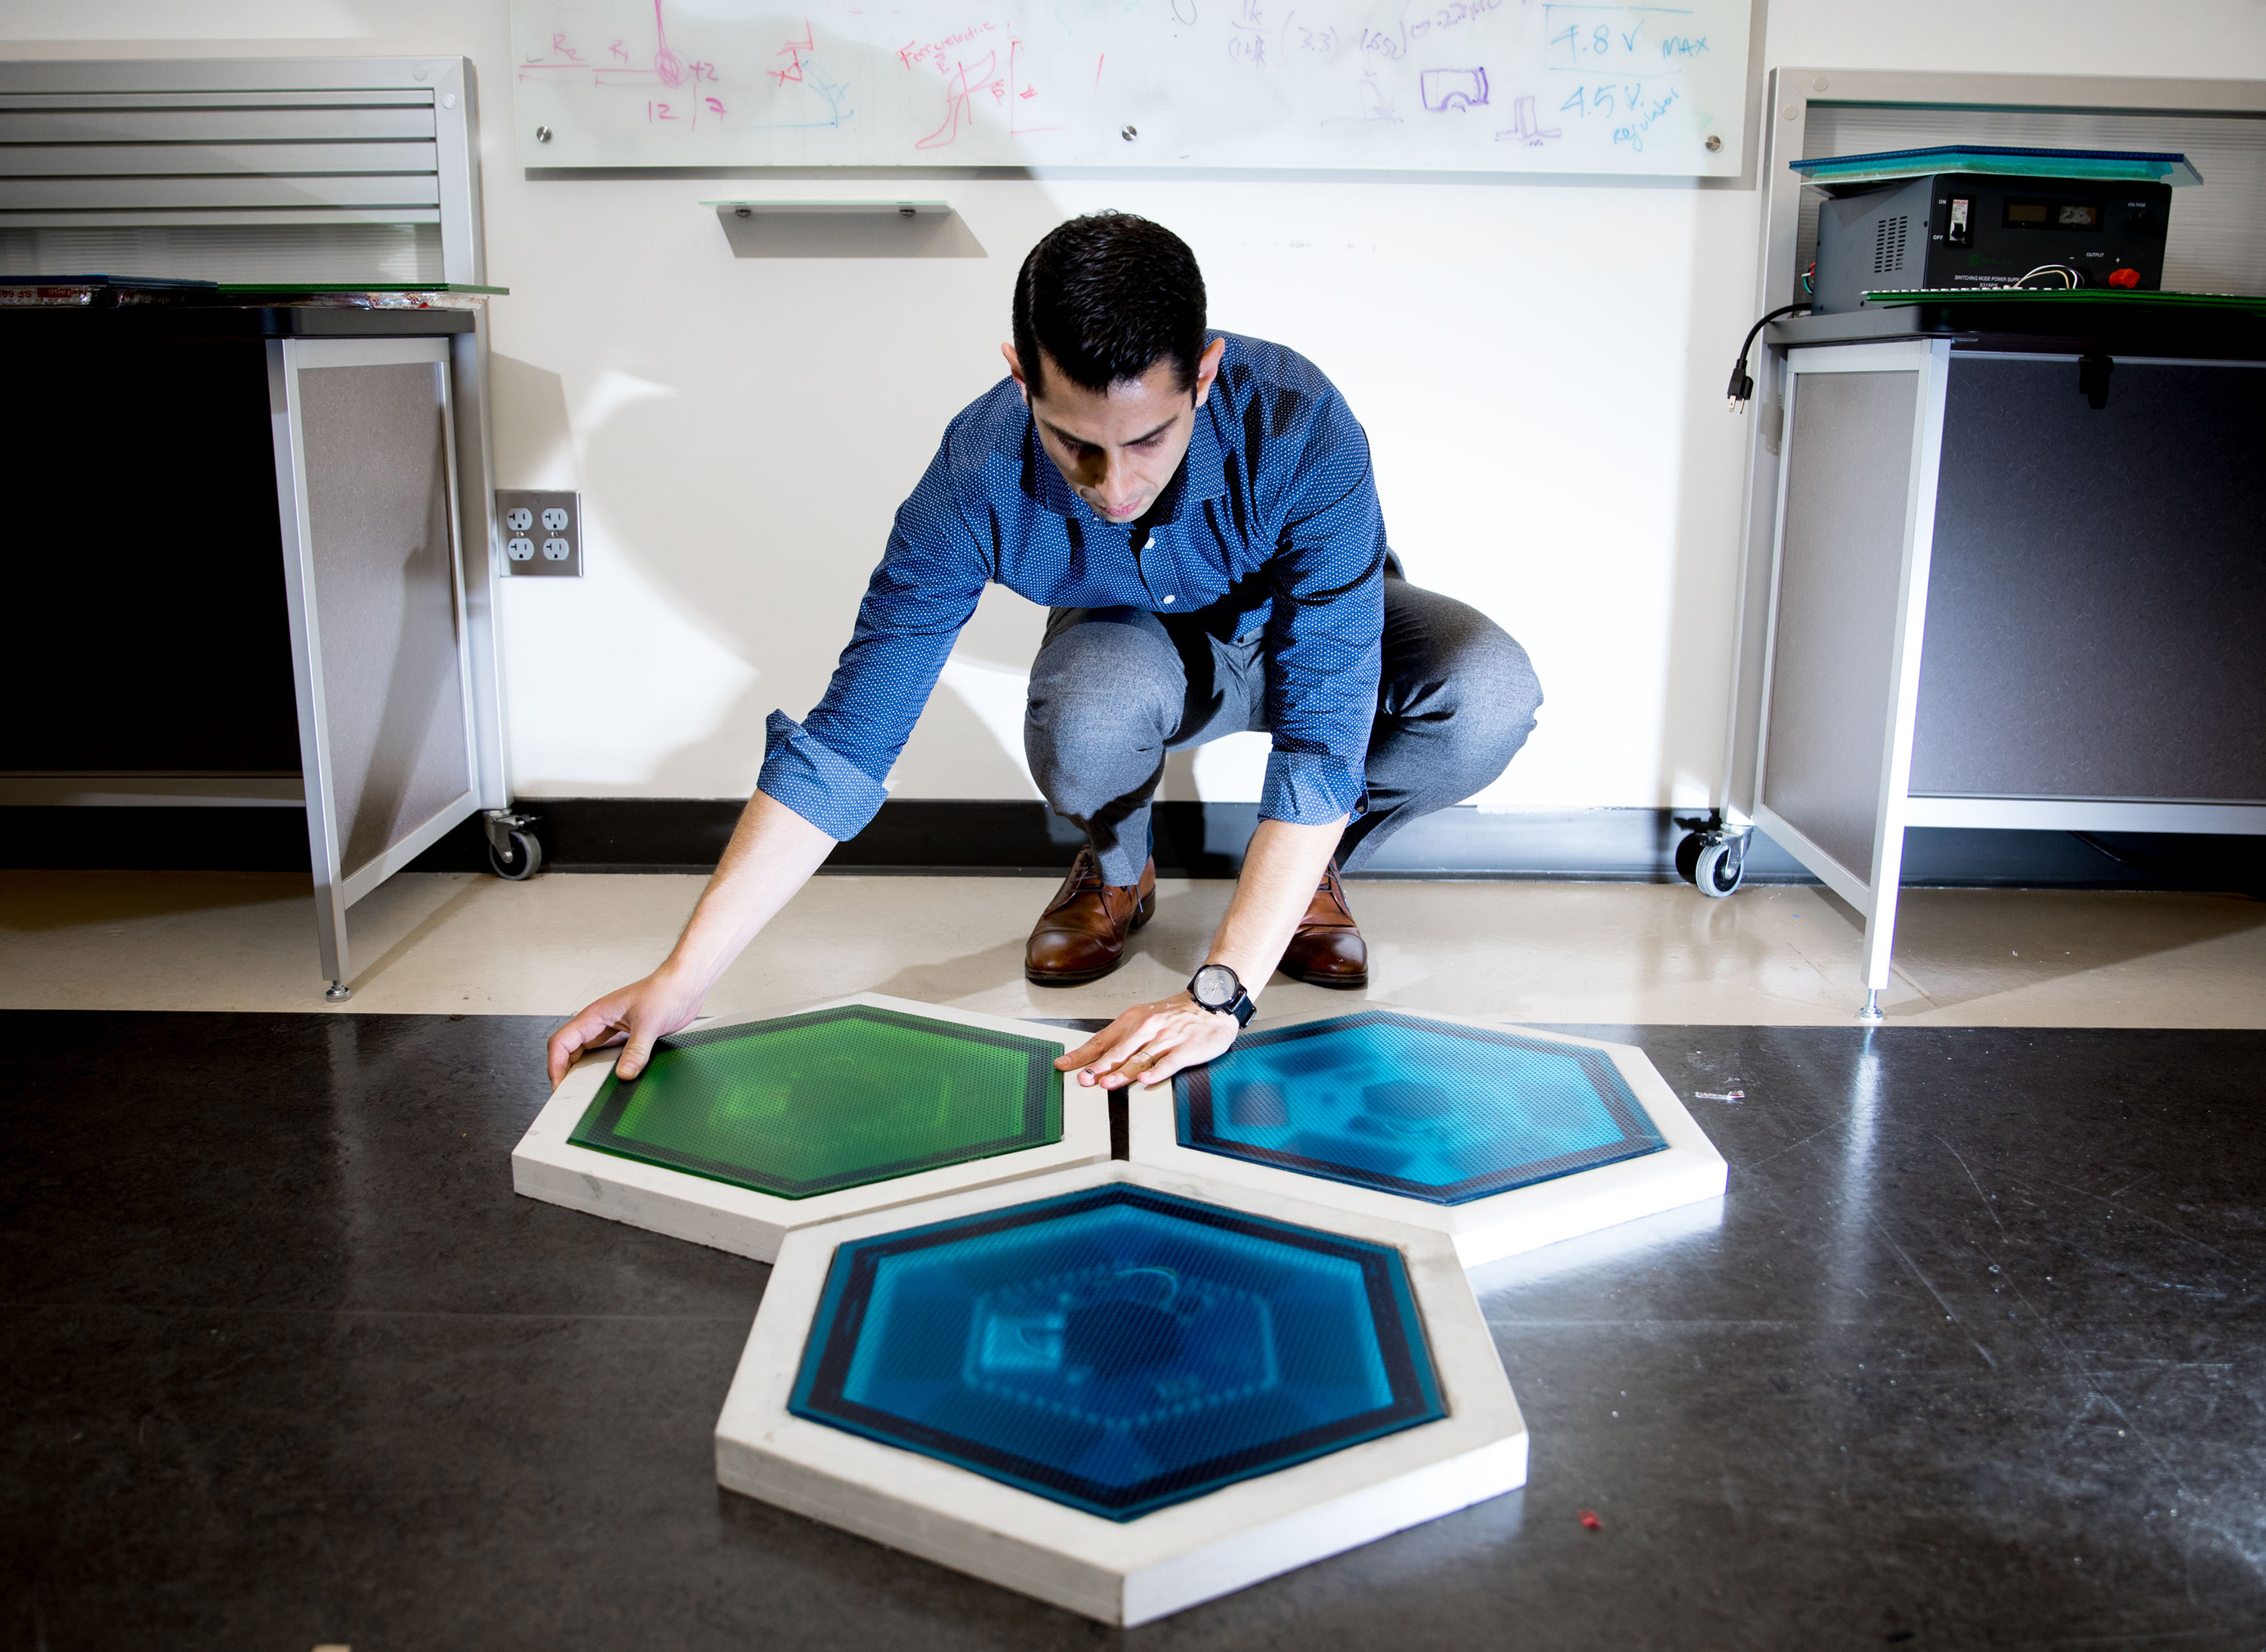 Ilan Stern, a GTRI senior research scientist, shows piezoelectric tiles that will be used to create a lighted outdoor footpath at the NASA Kennedy Space Center’s Visitor Complex at Cape Canaveral, Florida. He’s holding the electronic components used in the tiles. (Credit: Branden Camp, Georgia Tech)